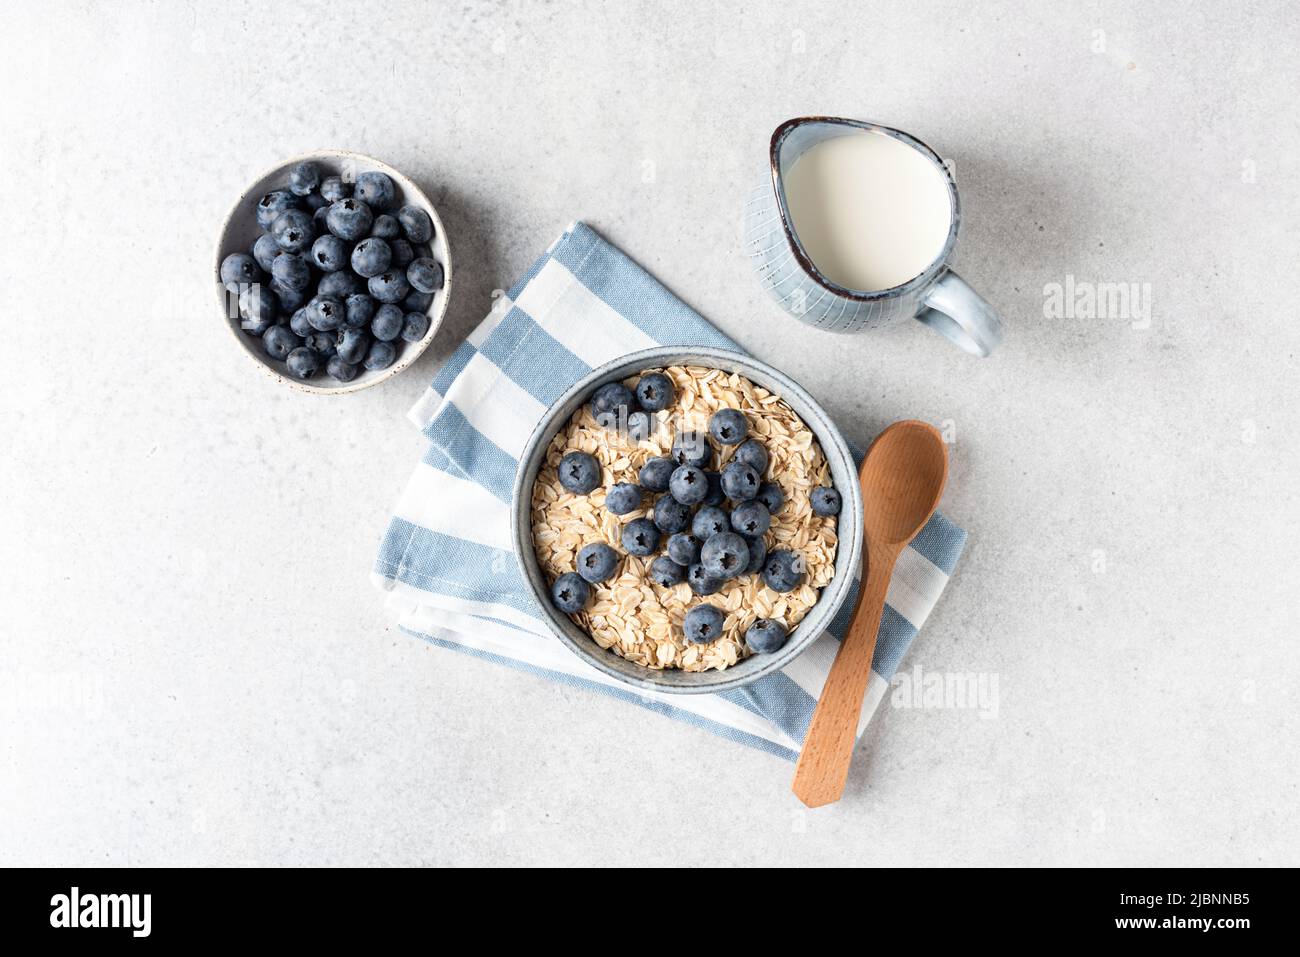 Dry rolled oats, blueberries and milk. Concept of healthy breakfast oatmeal porridge or muesli. Top view Stock Photo